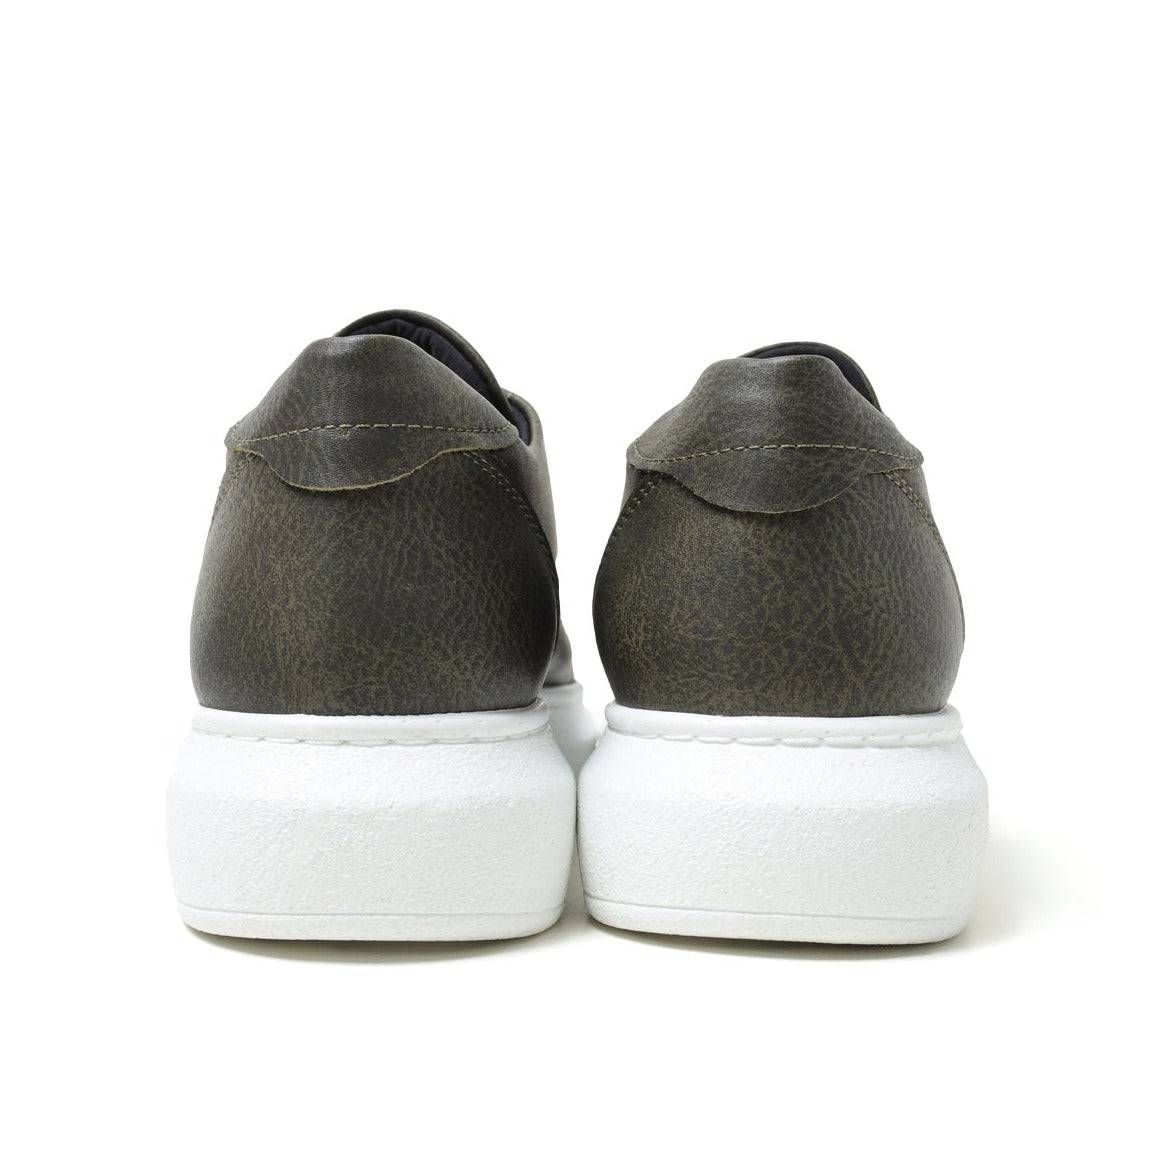 Slip-On Sneakers with Metal Toe for Men by Apollo | Luiz X in Verdant Vogue